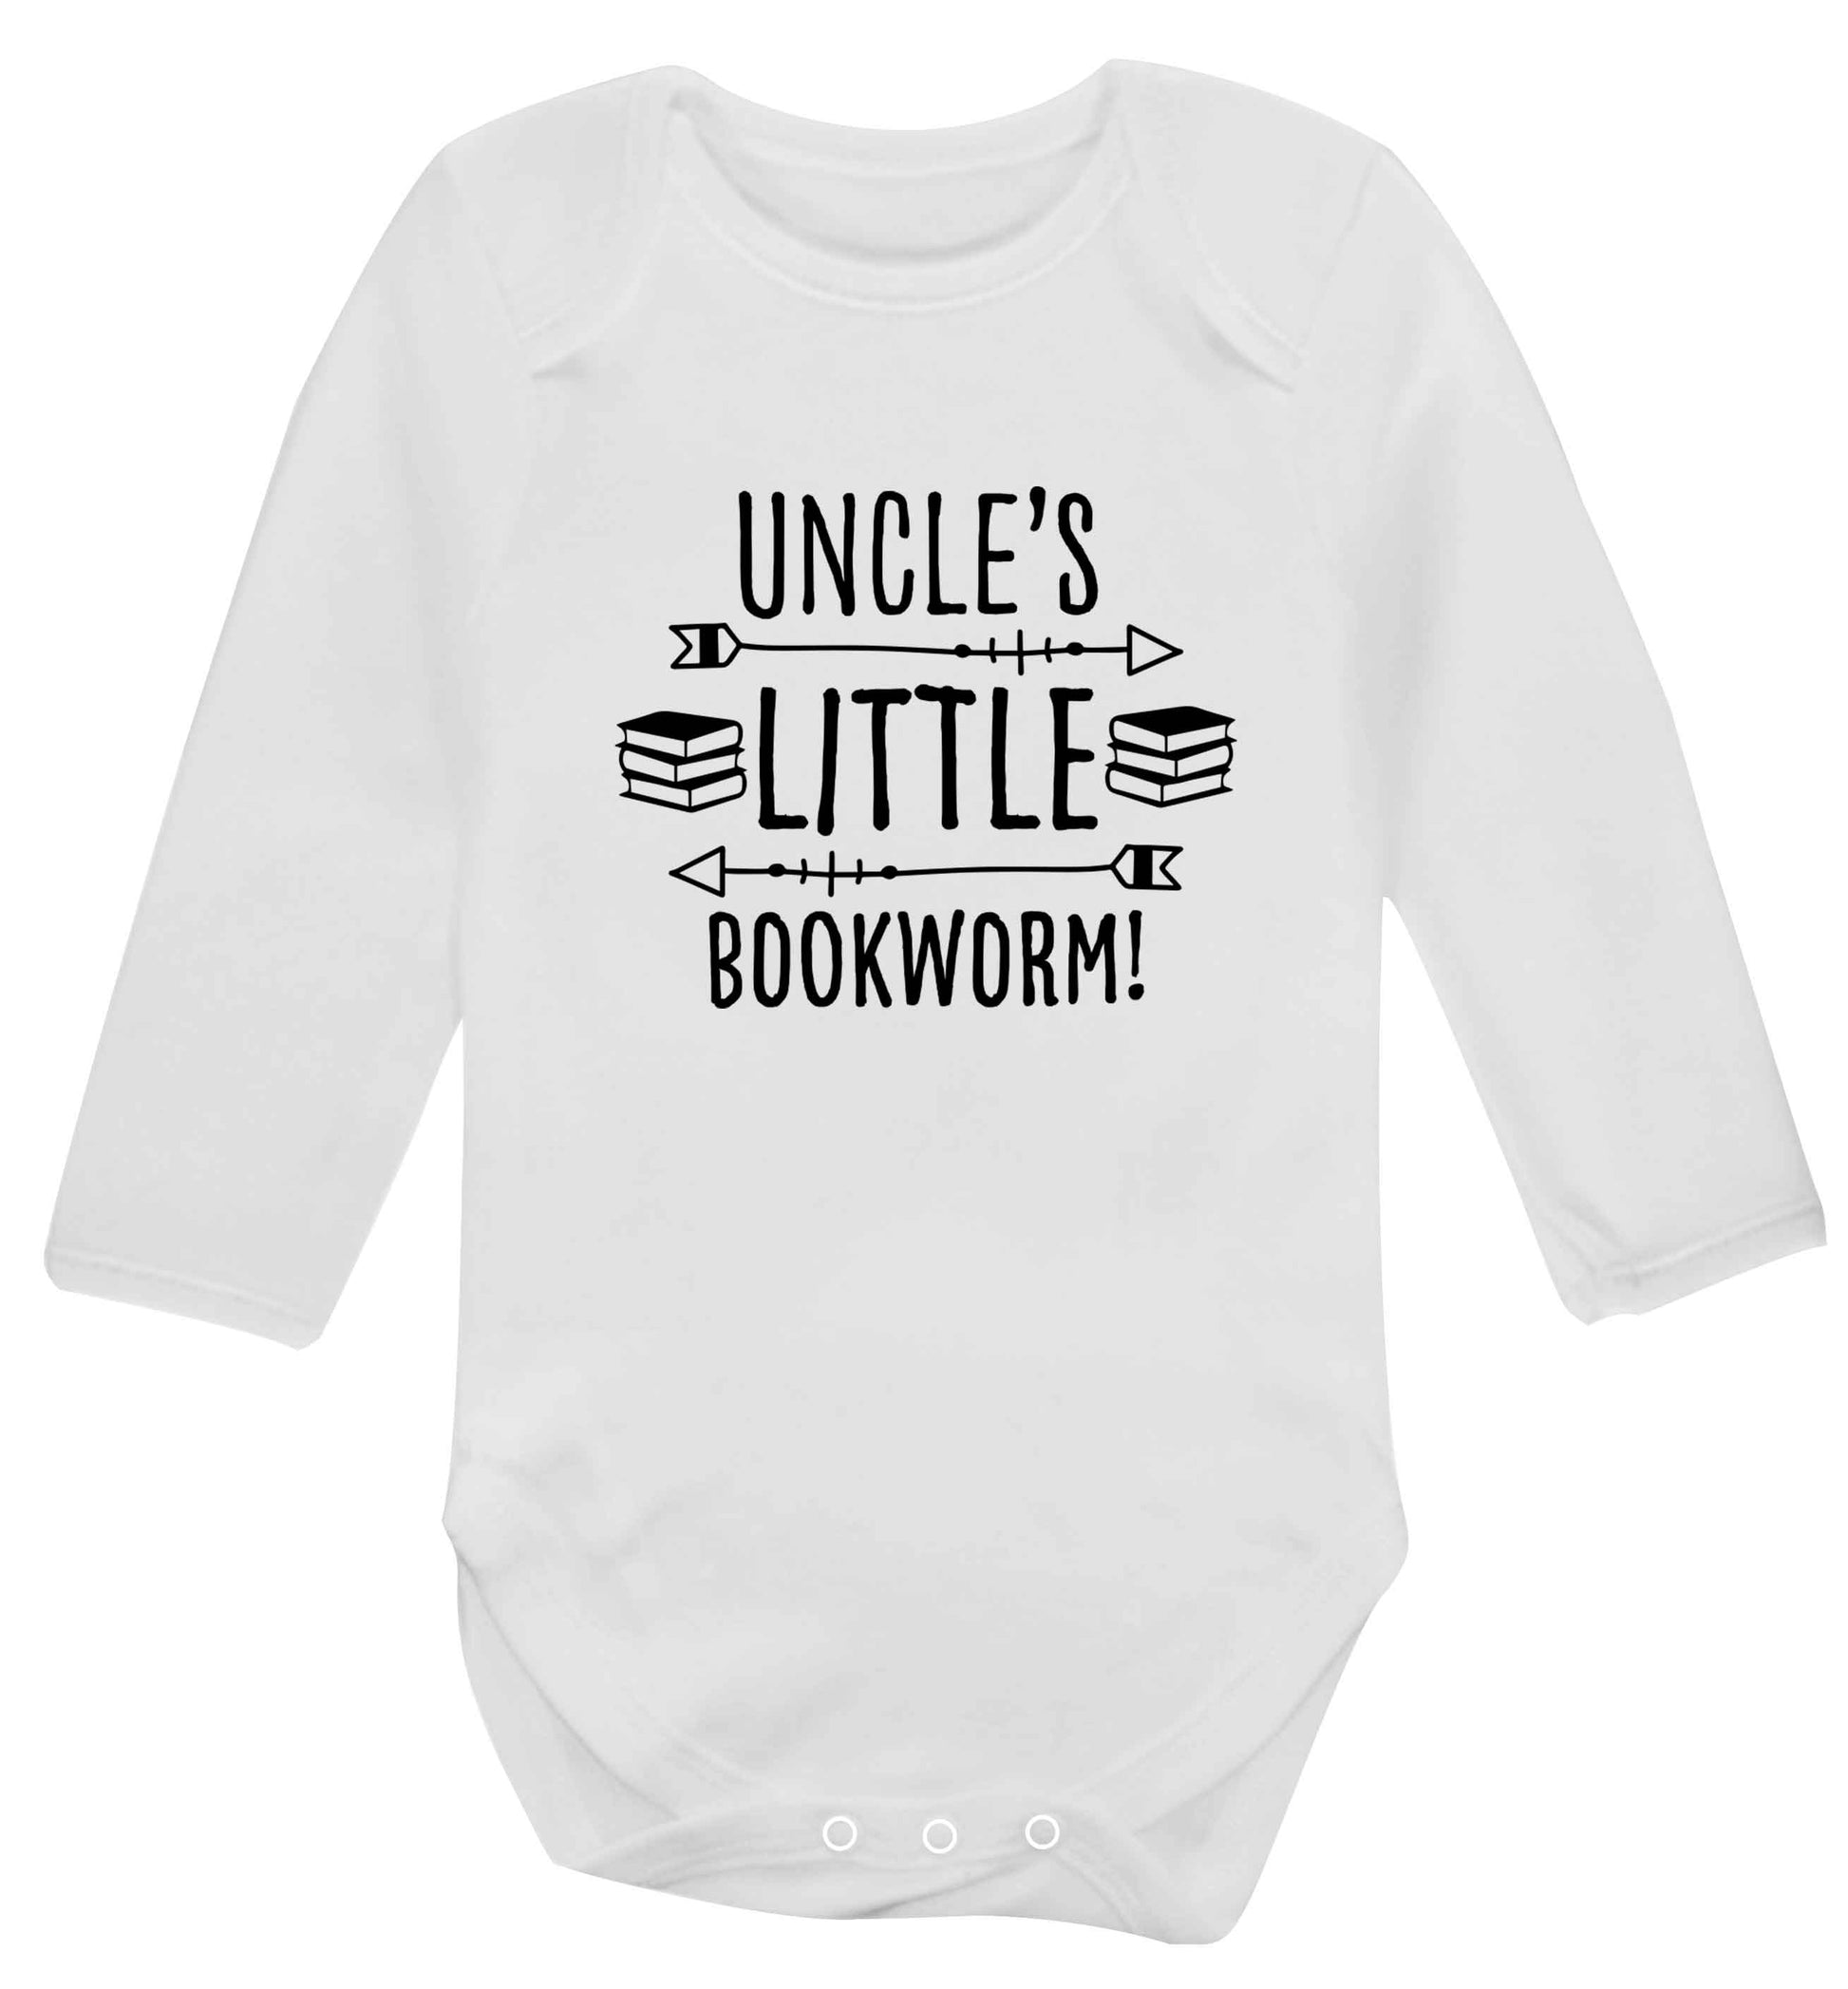 Uncle's little bookworm baby vest long sleeved white 6-12 months